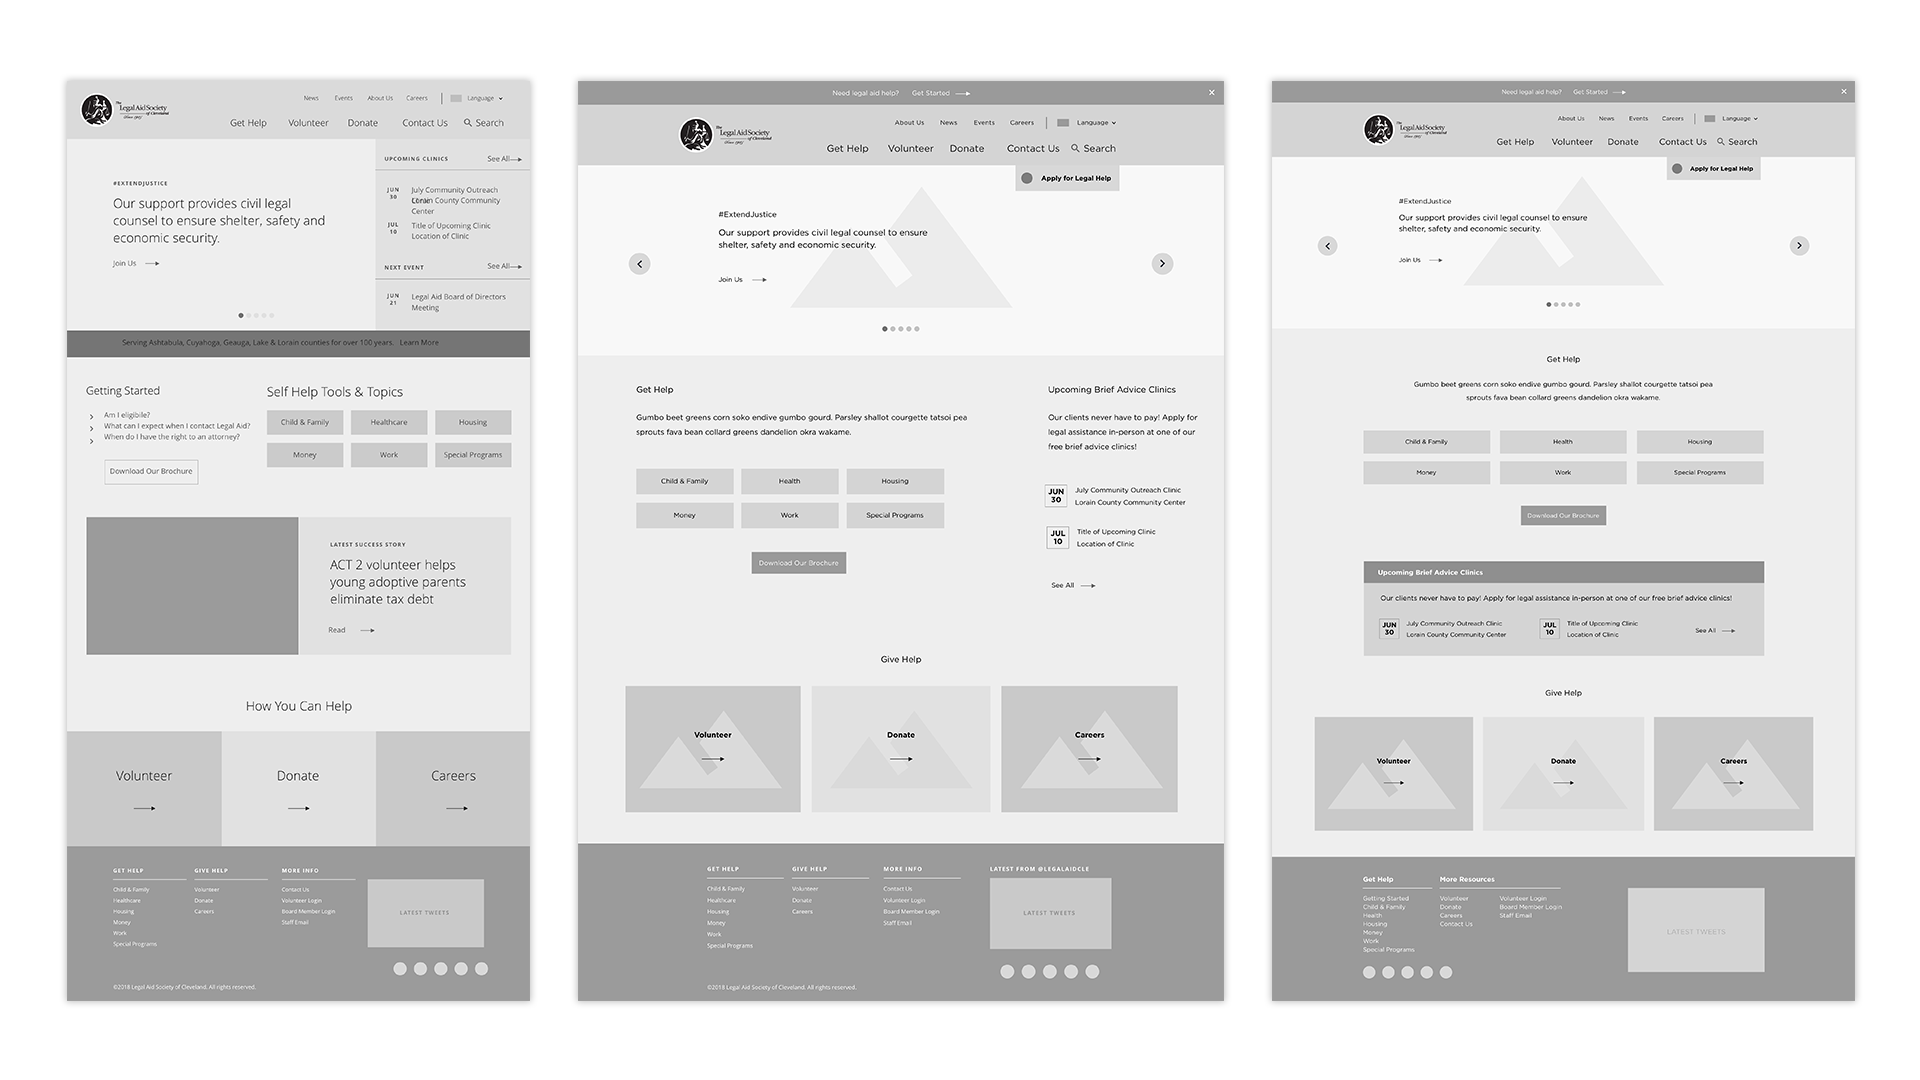 Homepage Wireframes